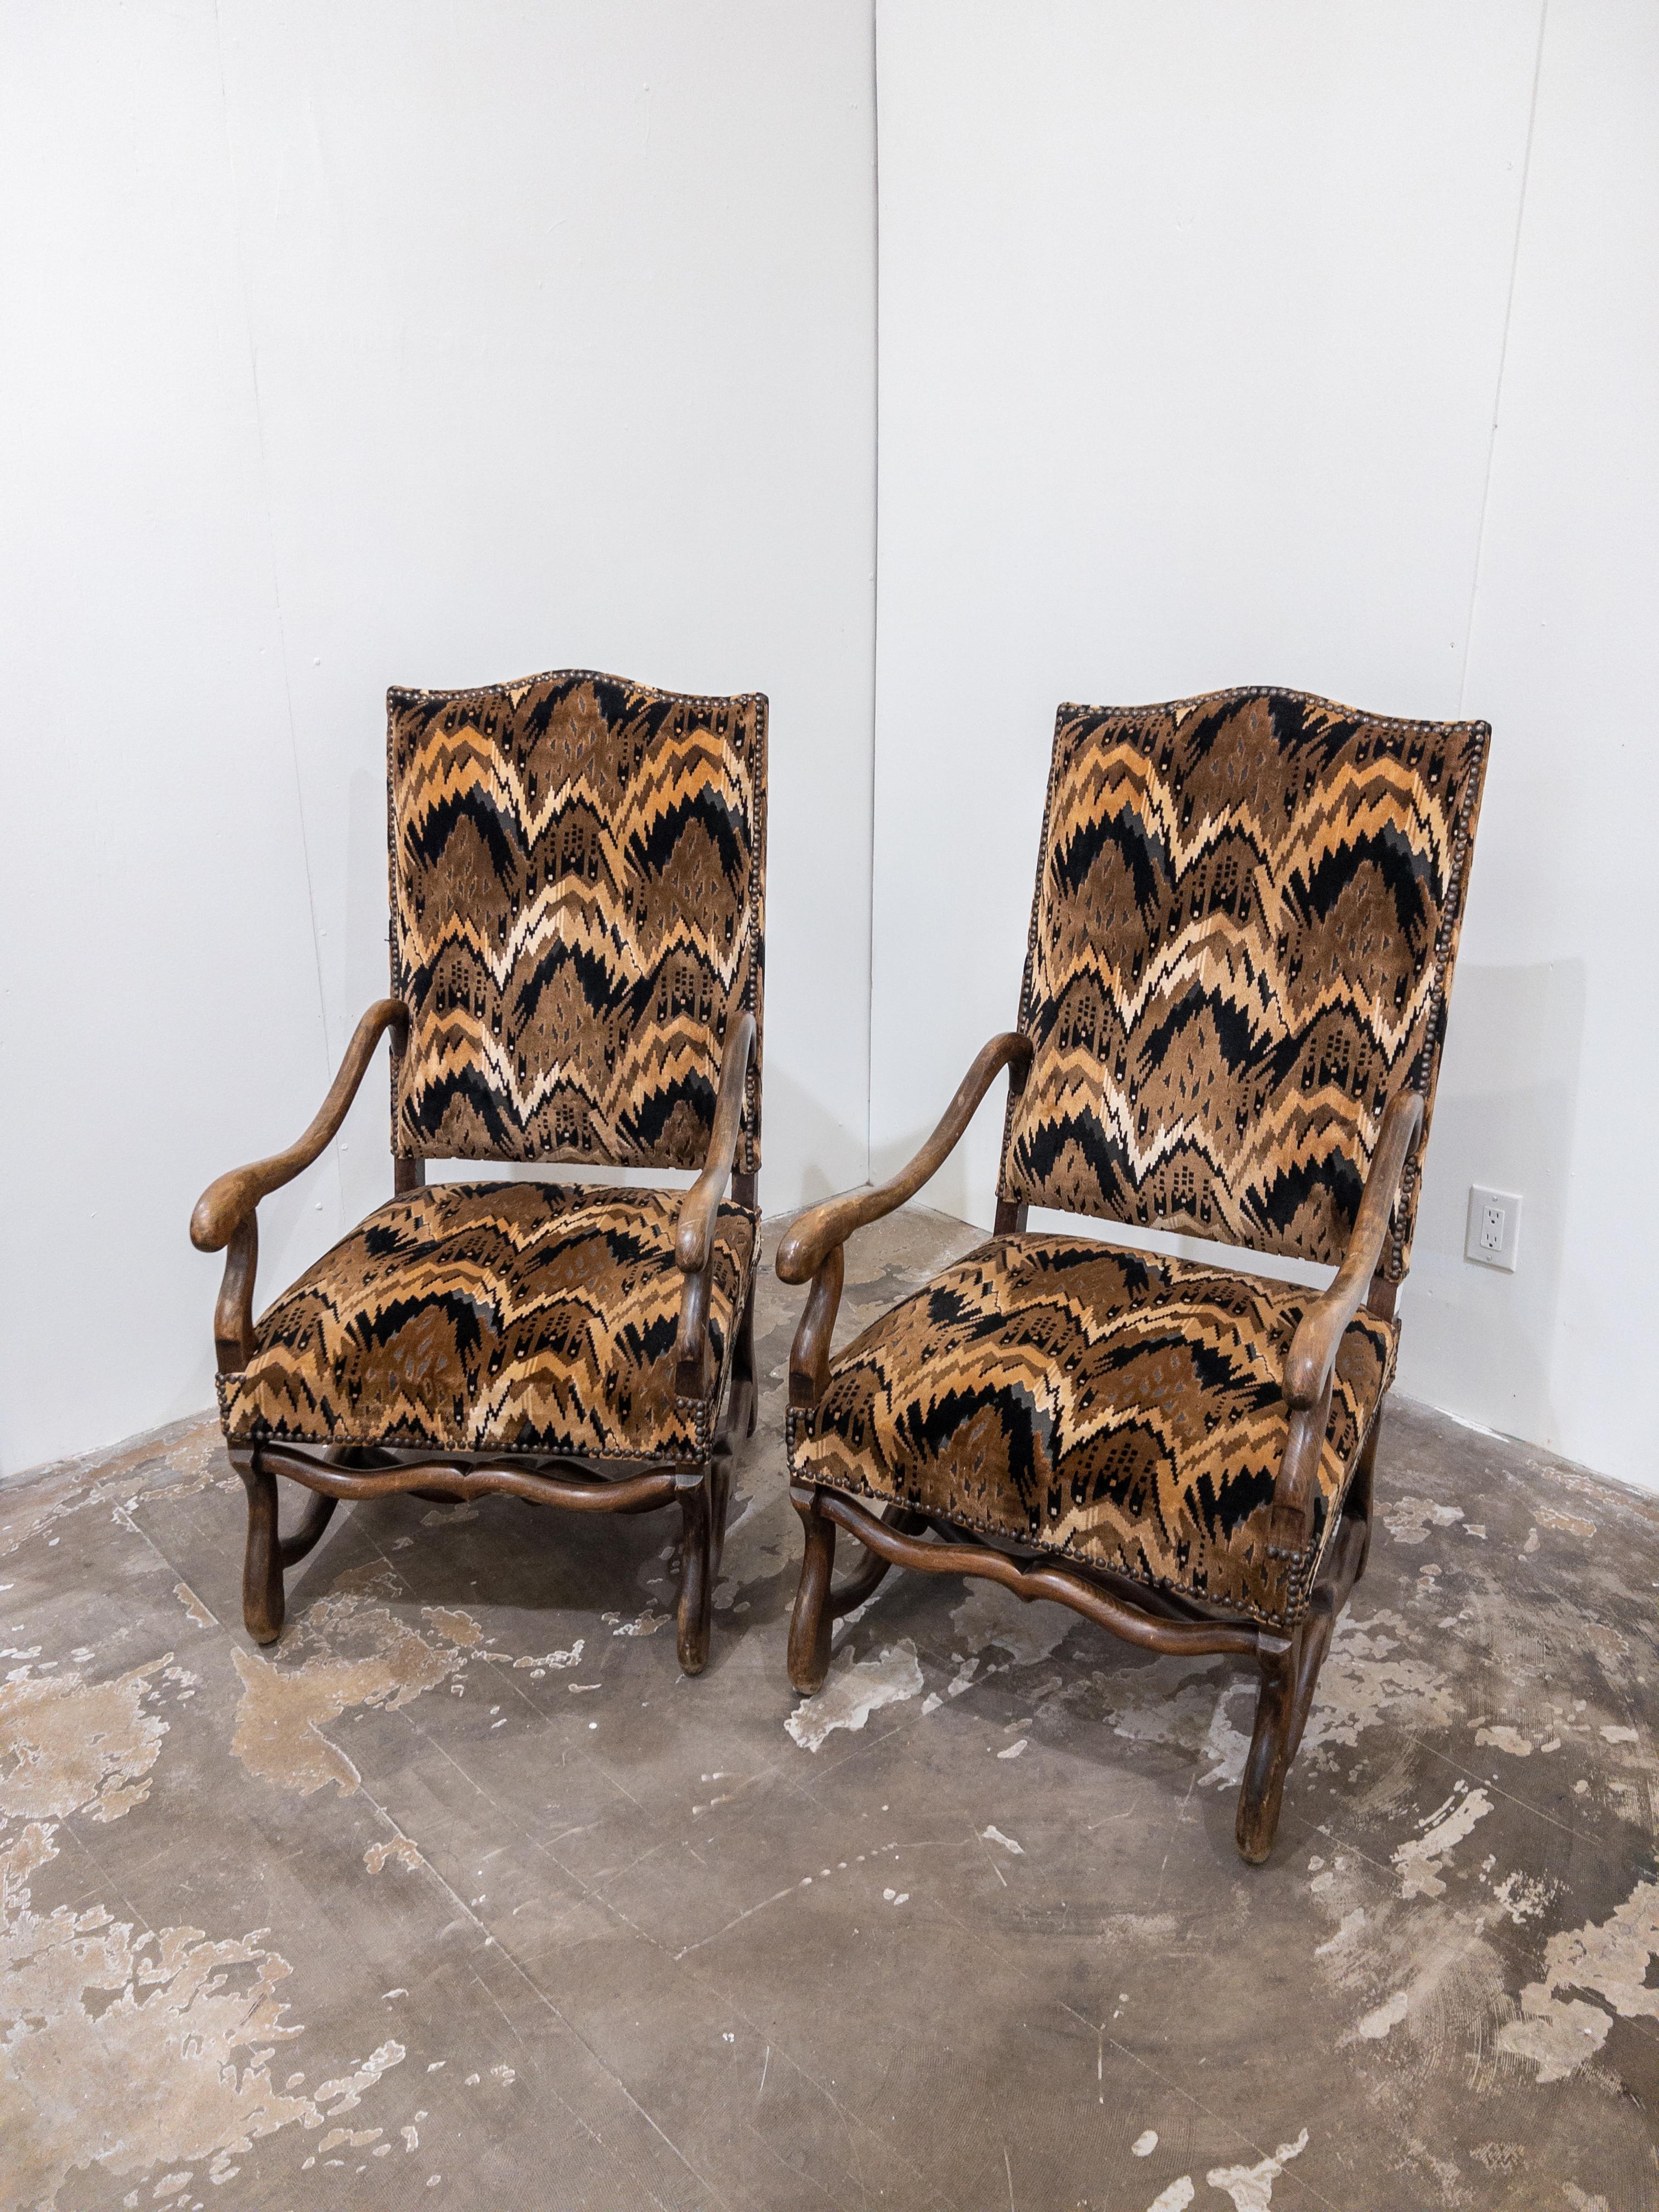 Pair of Late 19th Century Louis XIII Style Mouton Arm Chairs.
Exquisite and timeless, this pair of late 19th-century Louis XIII style mouton arm chairs epitomizes sophistication and elegance. Crafted with meticulous artistry, the chairs showcase a